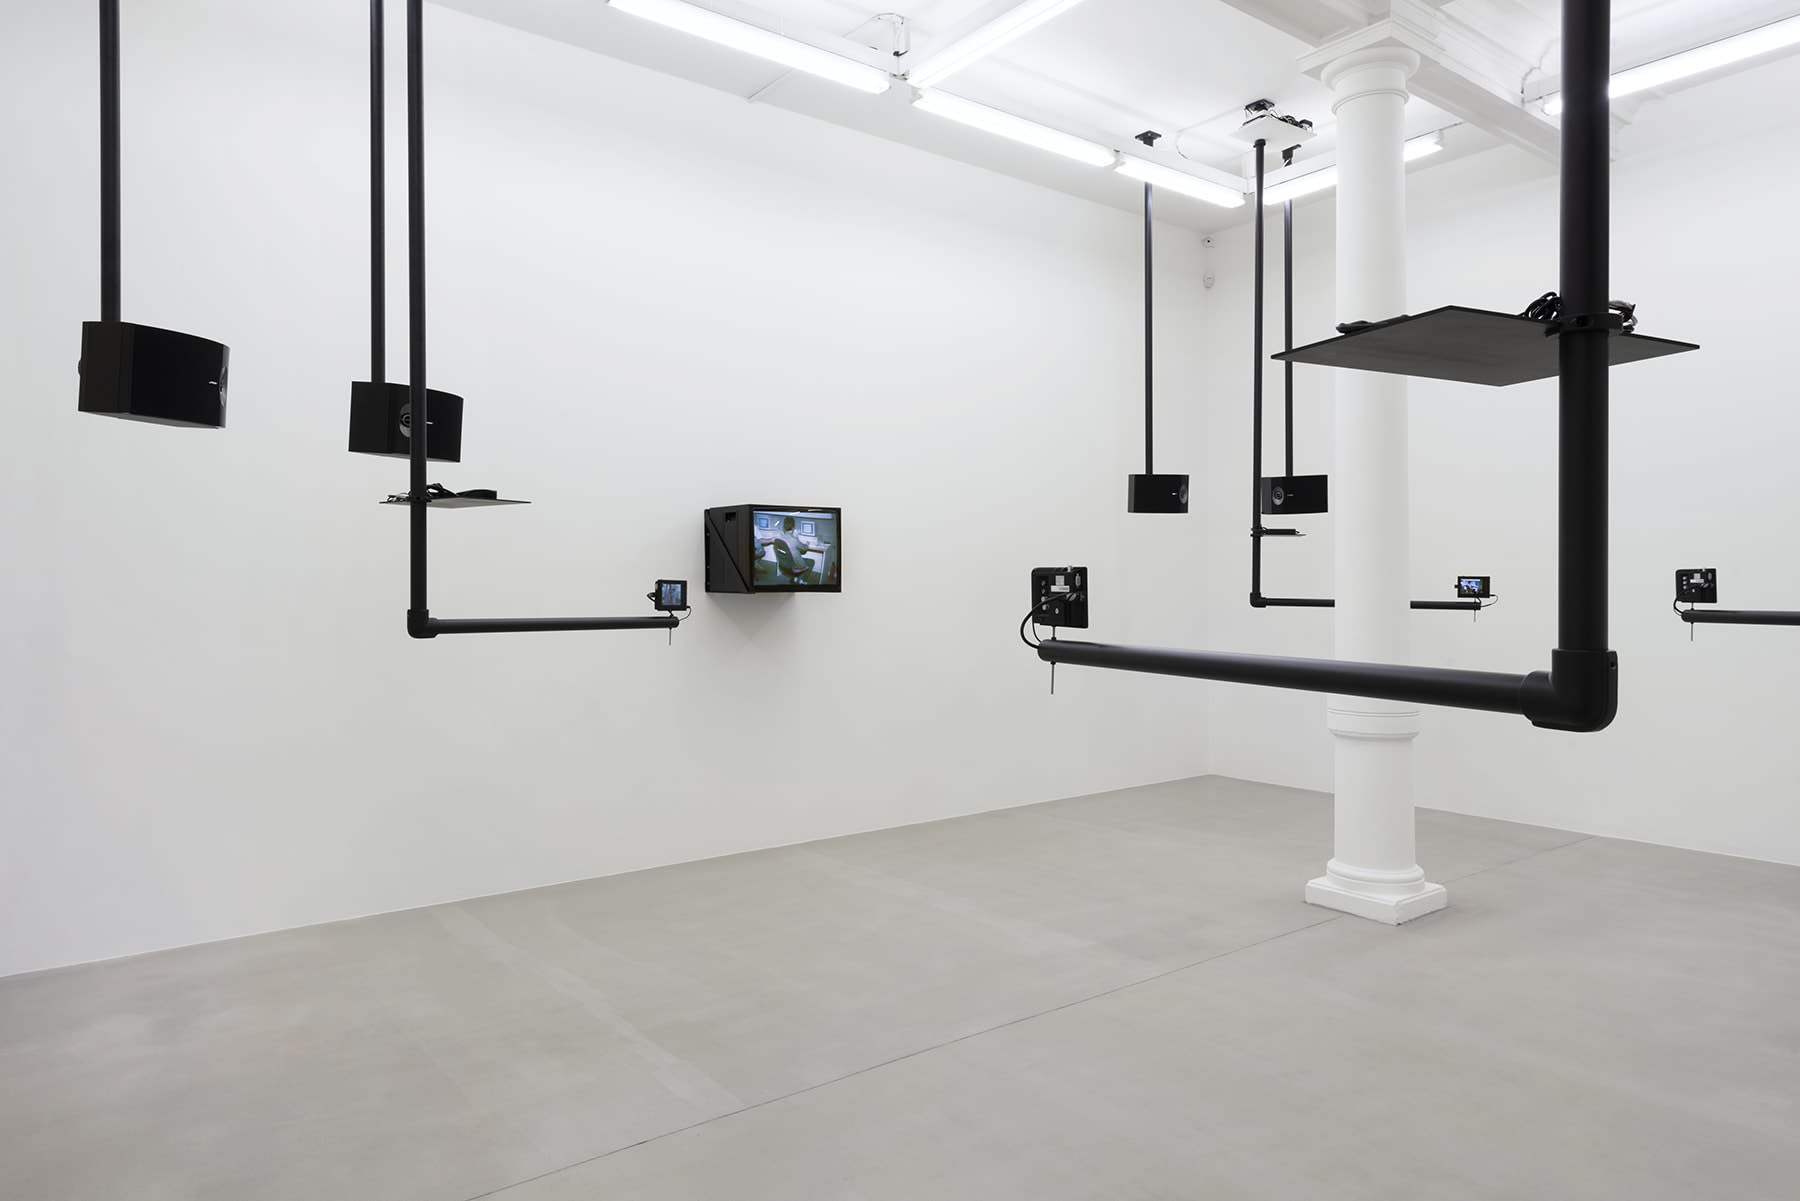 Installation: screens and speakers rest on suspended black platforms.